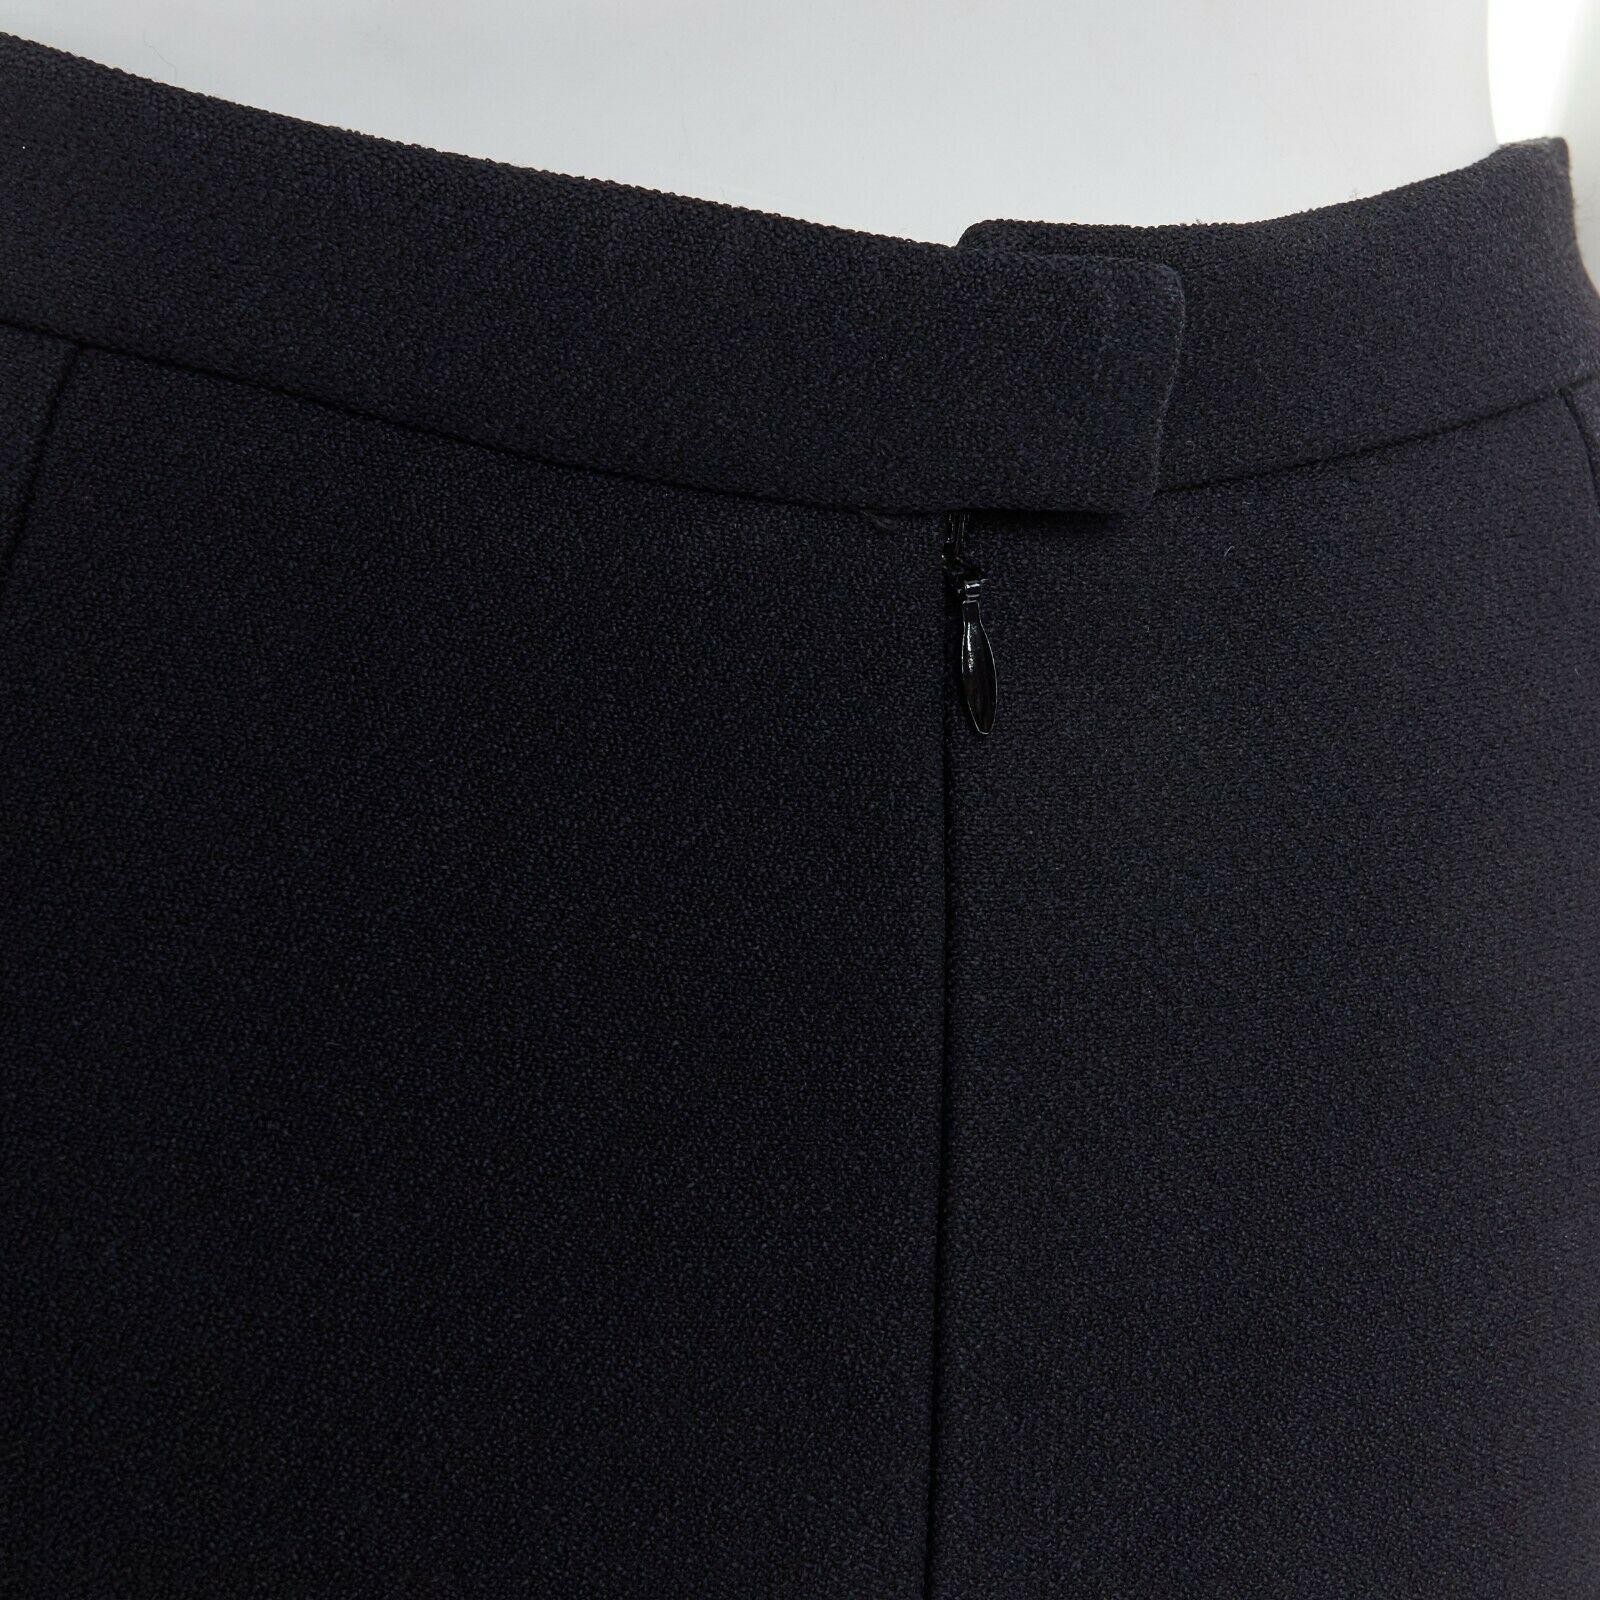 runway BALENCIAGA GHESQUIERE AW11 black faux leather panel skirt FR36 US4 UK8 S 3